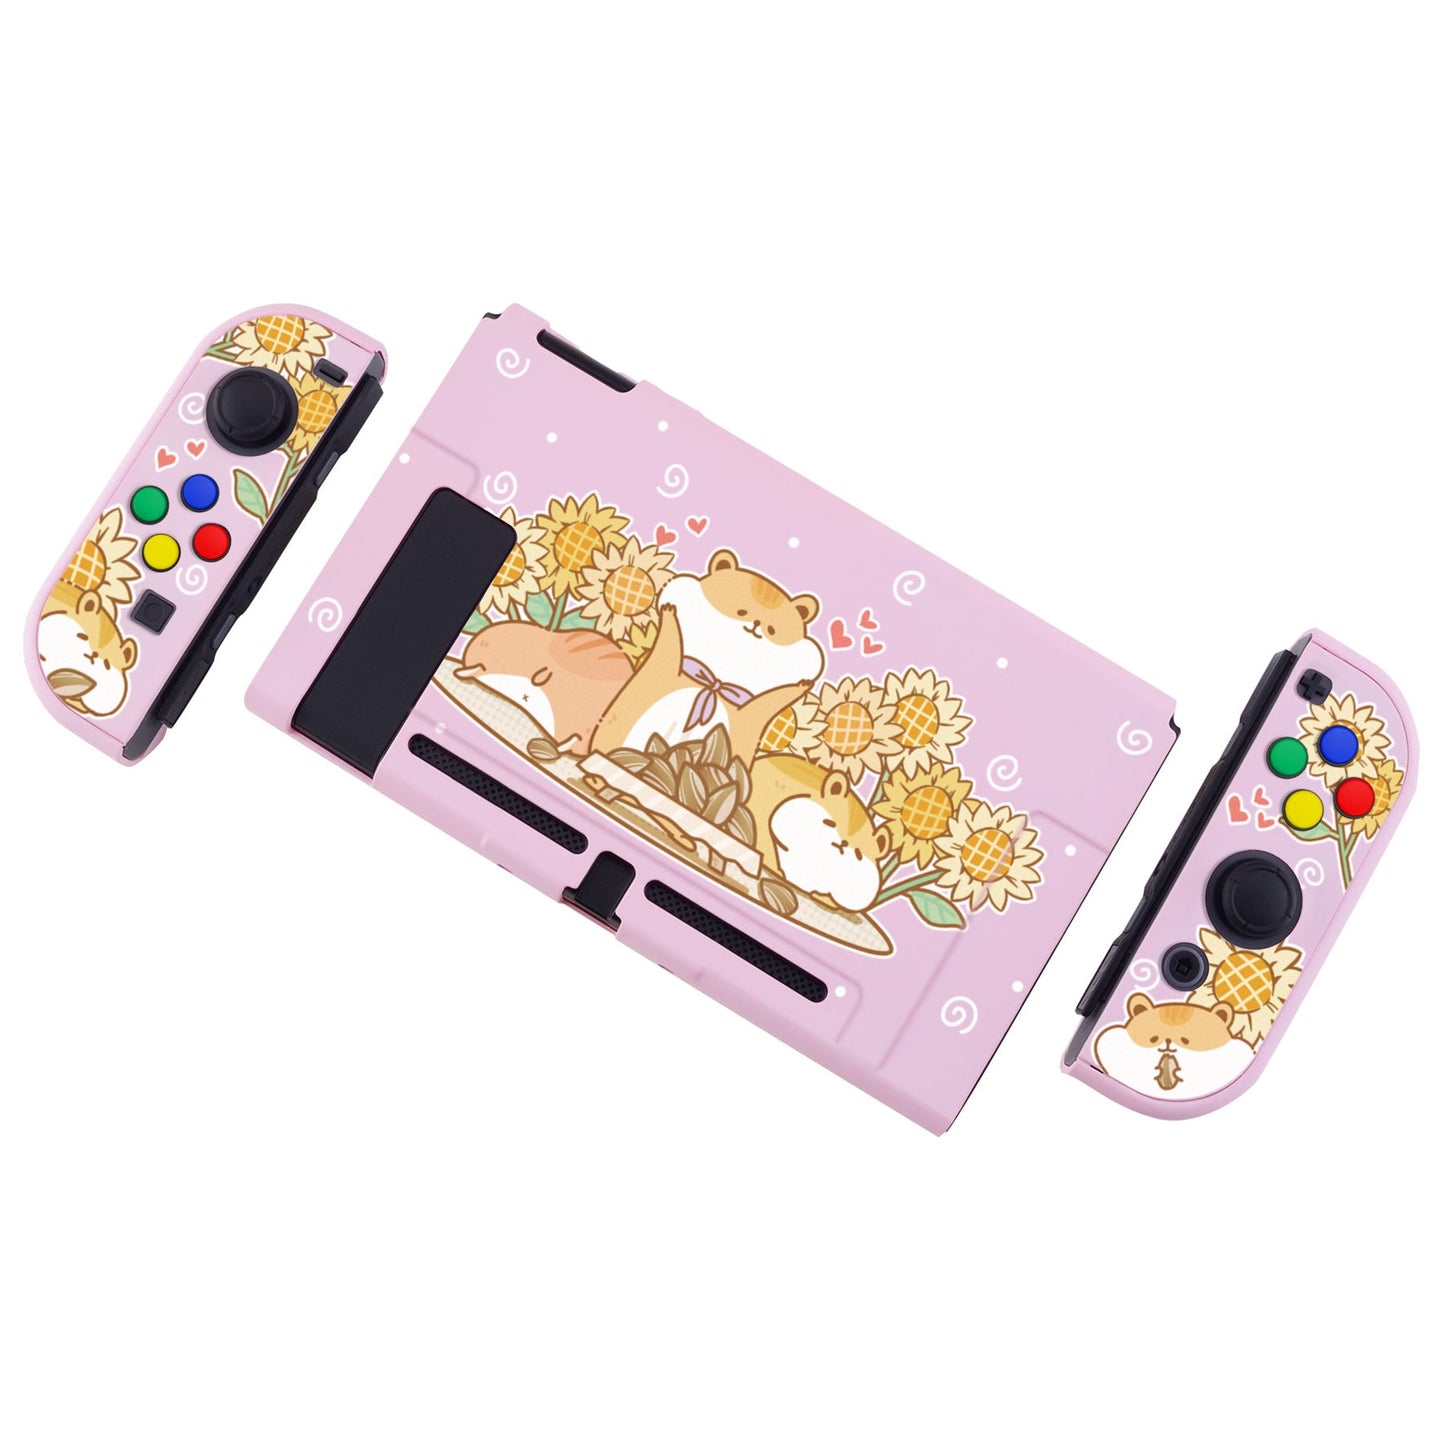 PlayVital Hamster & Sunflower Back Cover for NS Switch Console, NS Joycon Handheld Controller Separable Protector Hard Shell, Dockable Protective Case with Colorful ABXY Direction Button Caps - NTT106 PlayVital